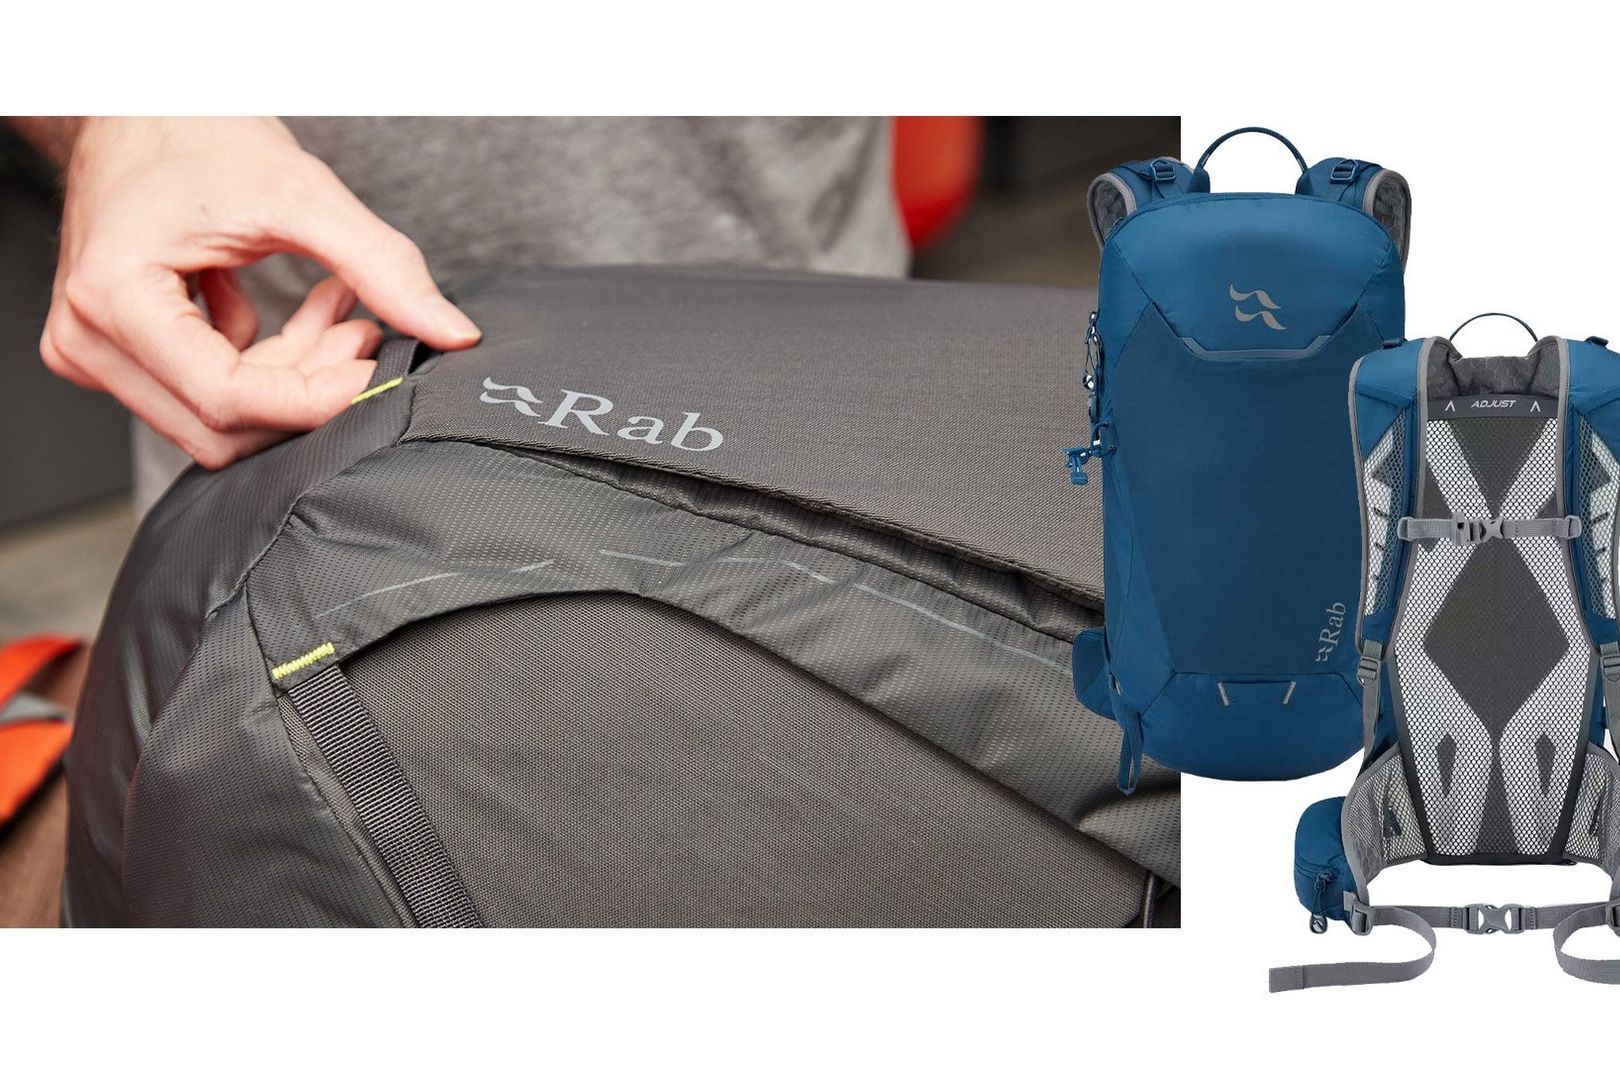 A first look at Rab's Aeon packs at the Rab Lab